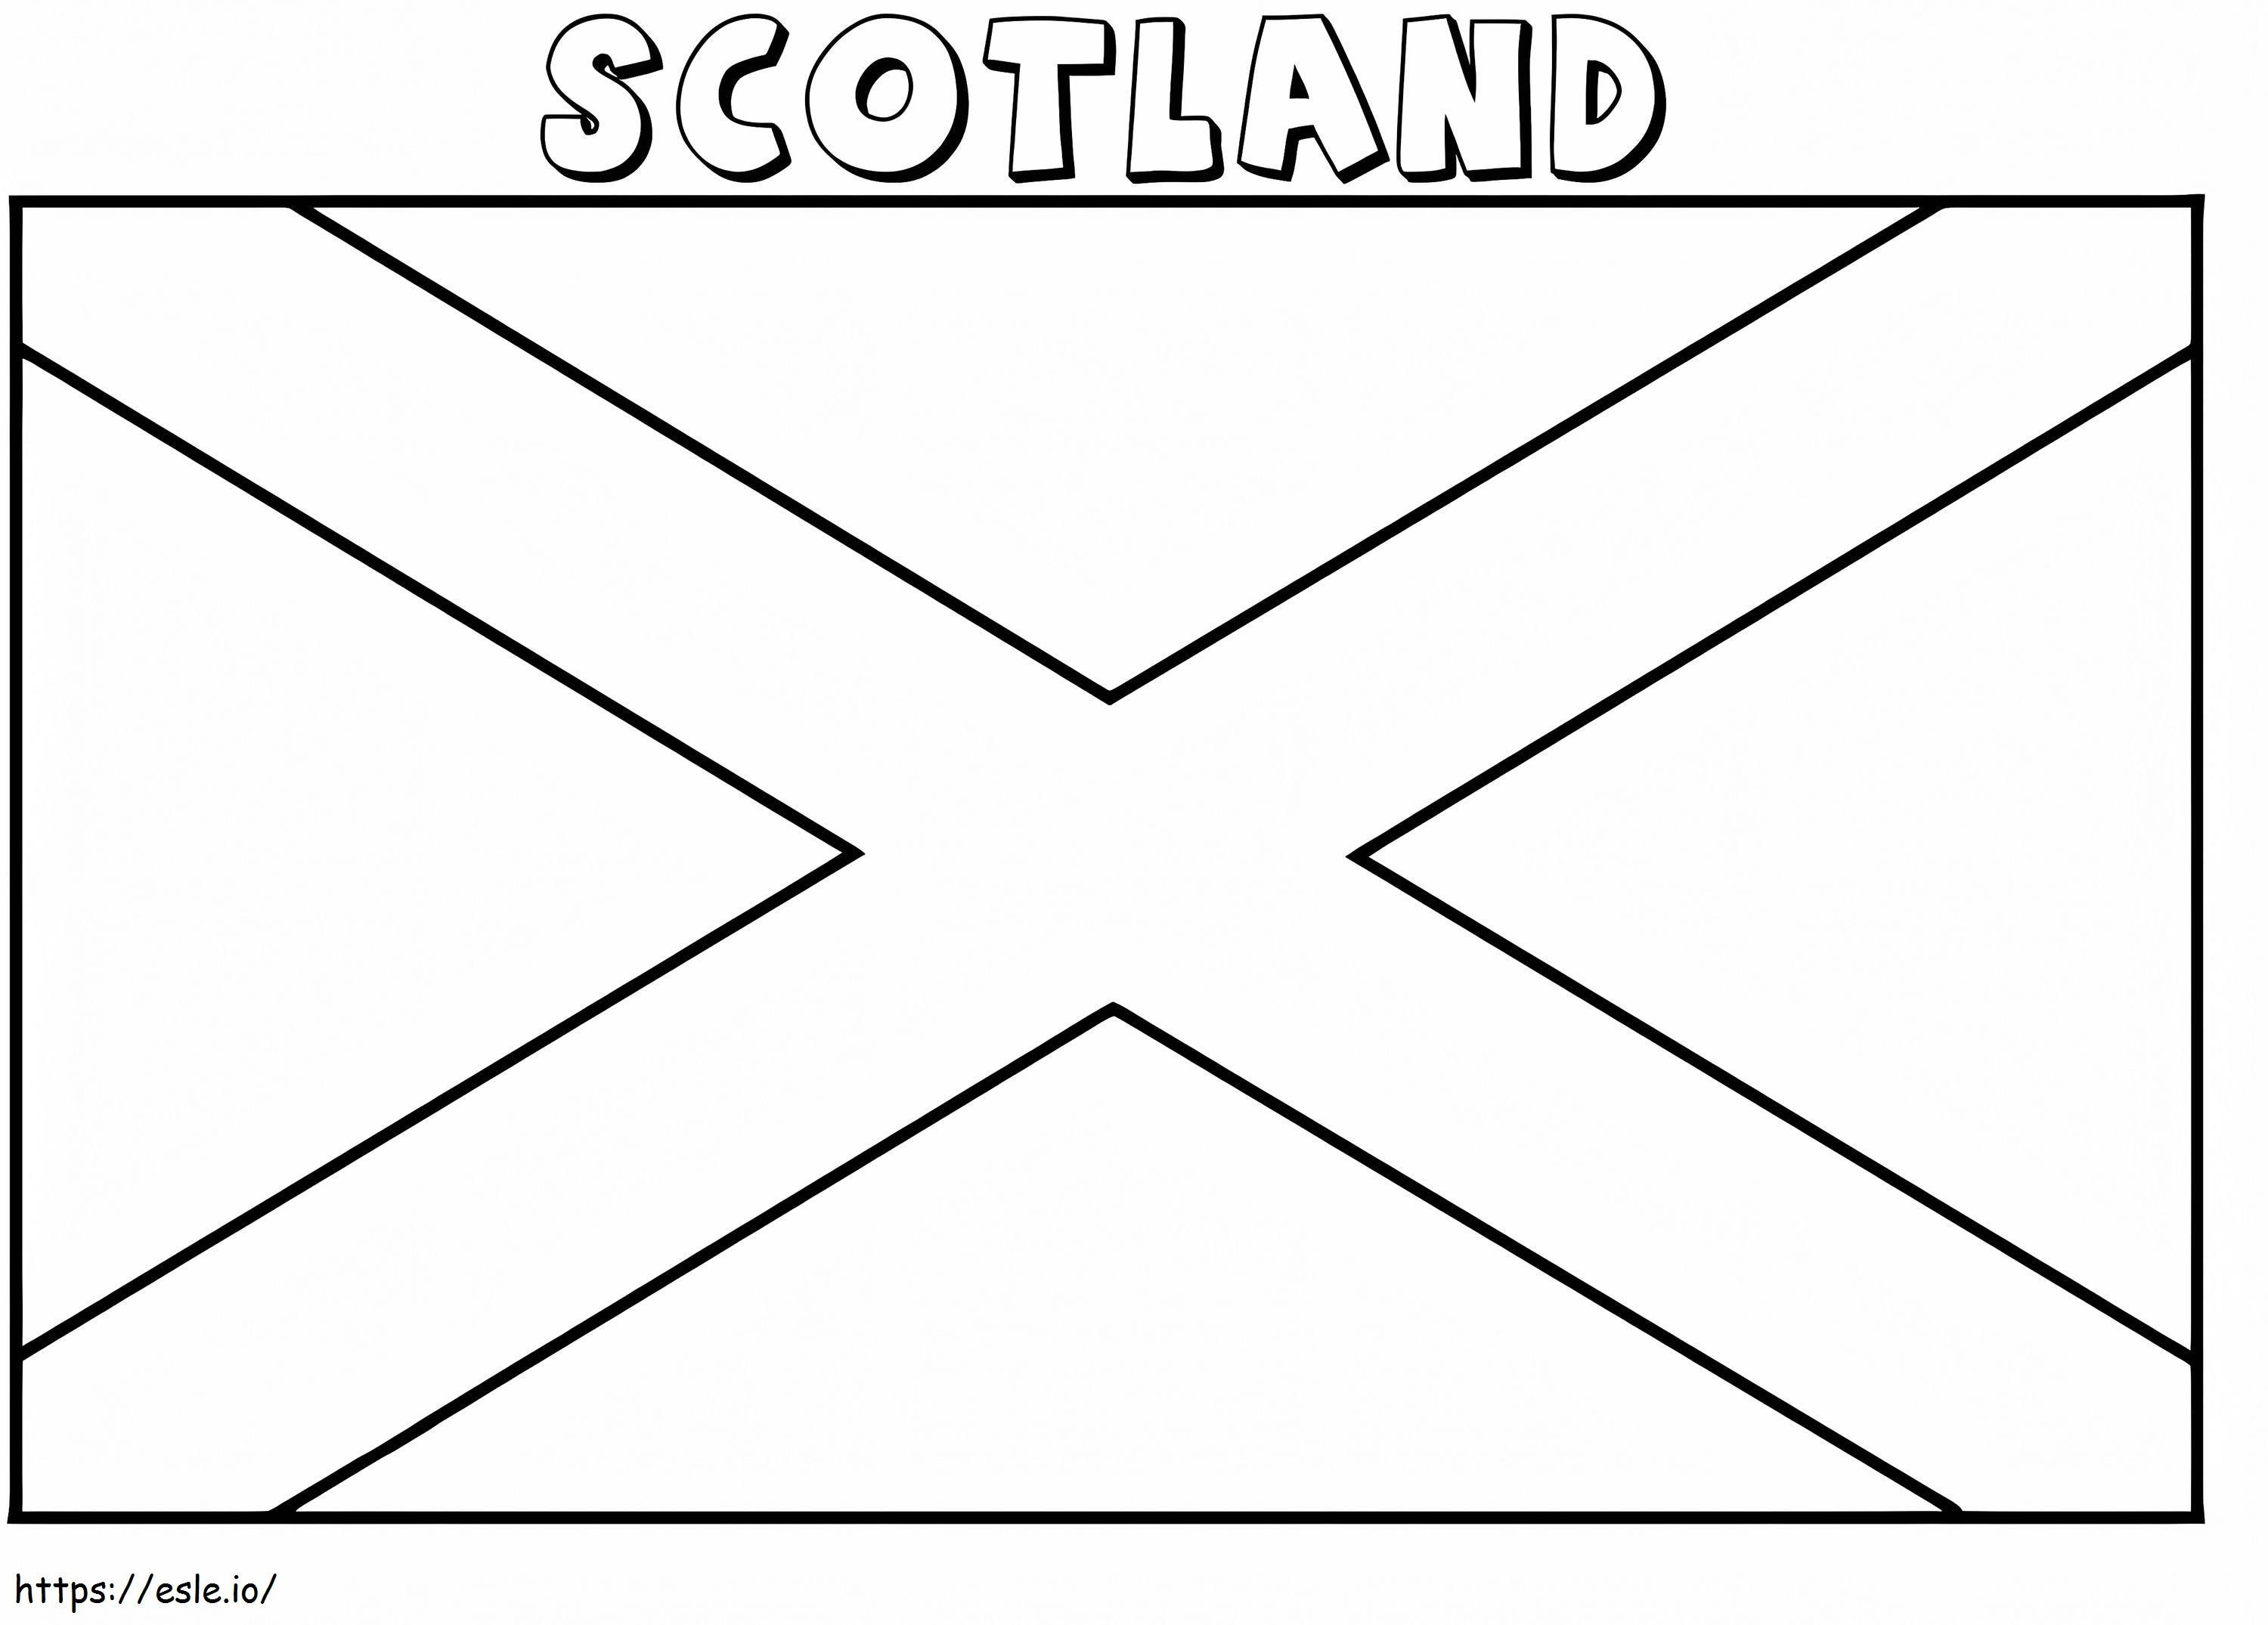 Scotland'S Flag coloring page